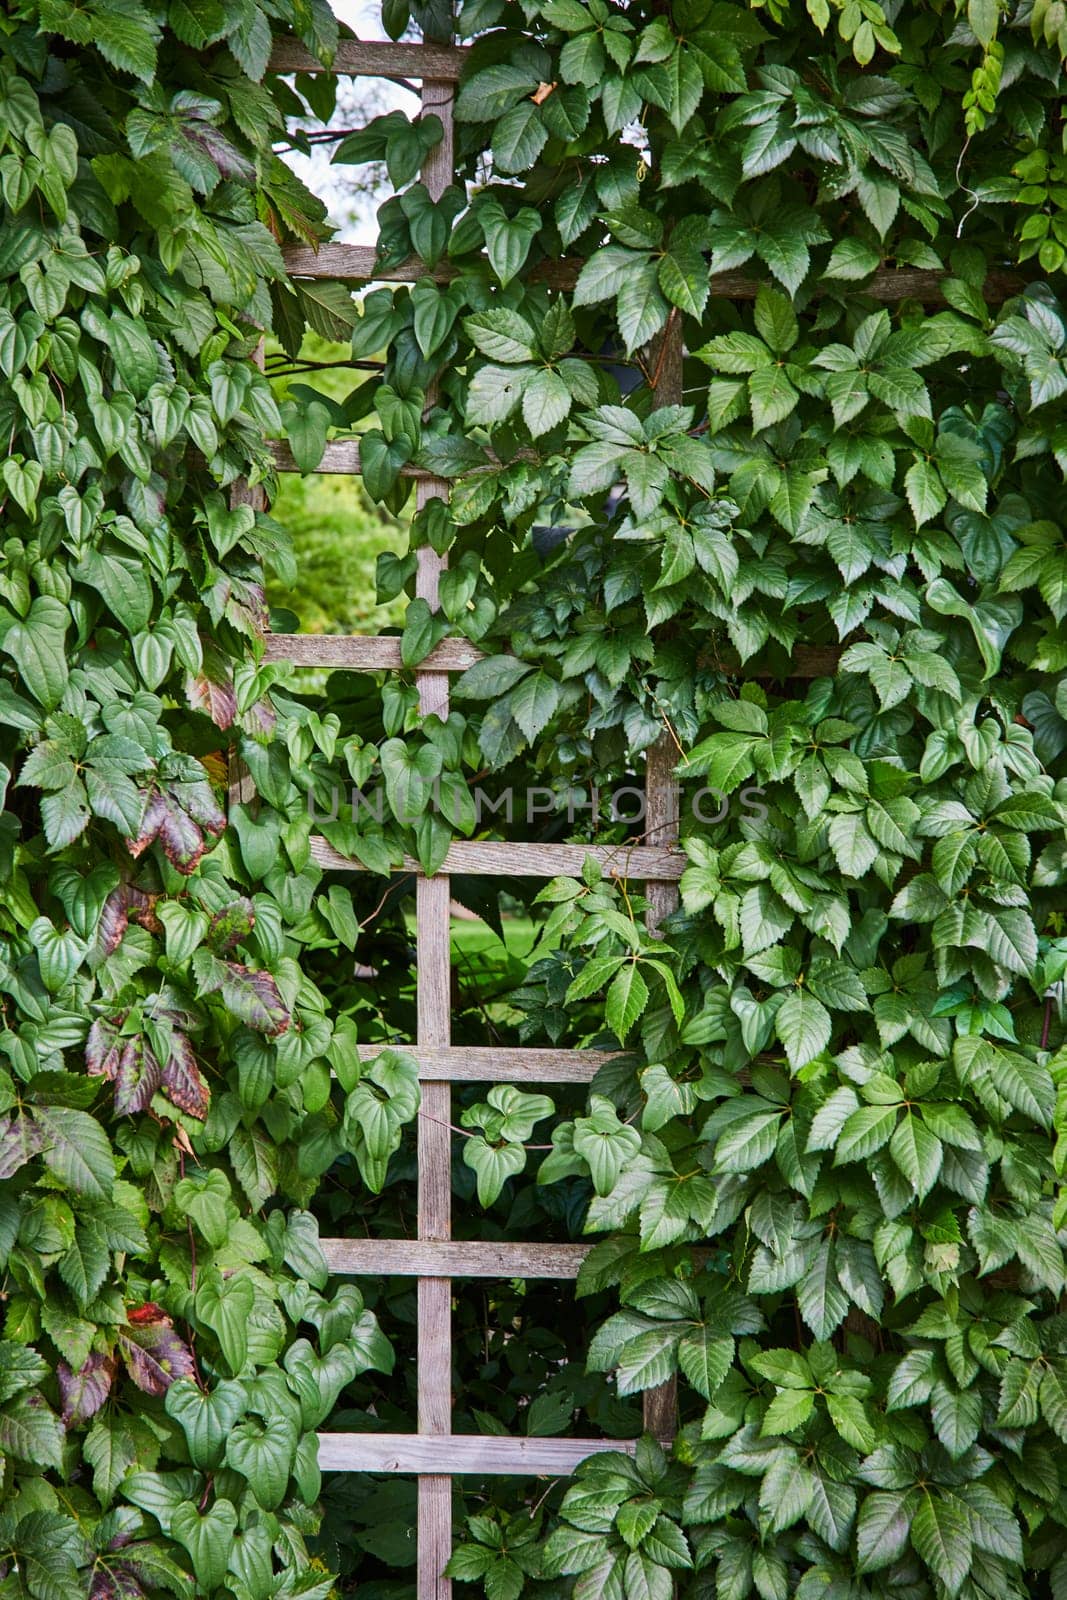 Rustic Ladder Enveloped by Lush Ivy Foliage - Garden Serenity by njproductions